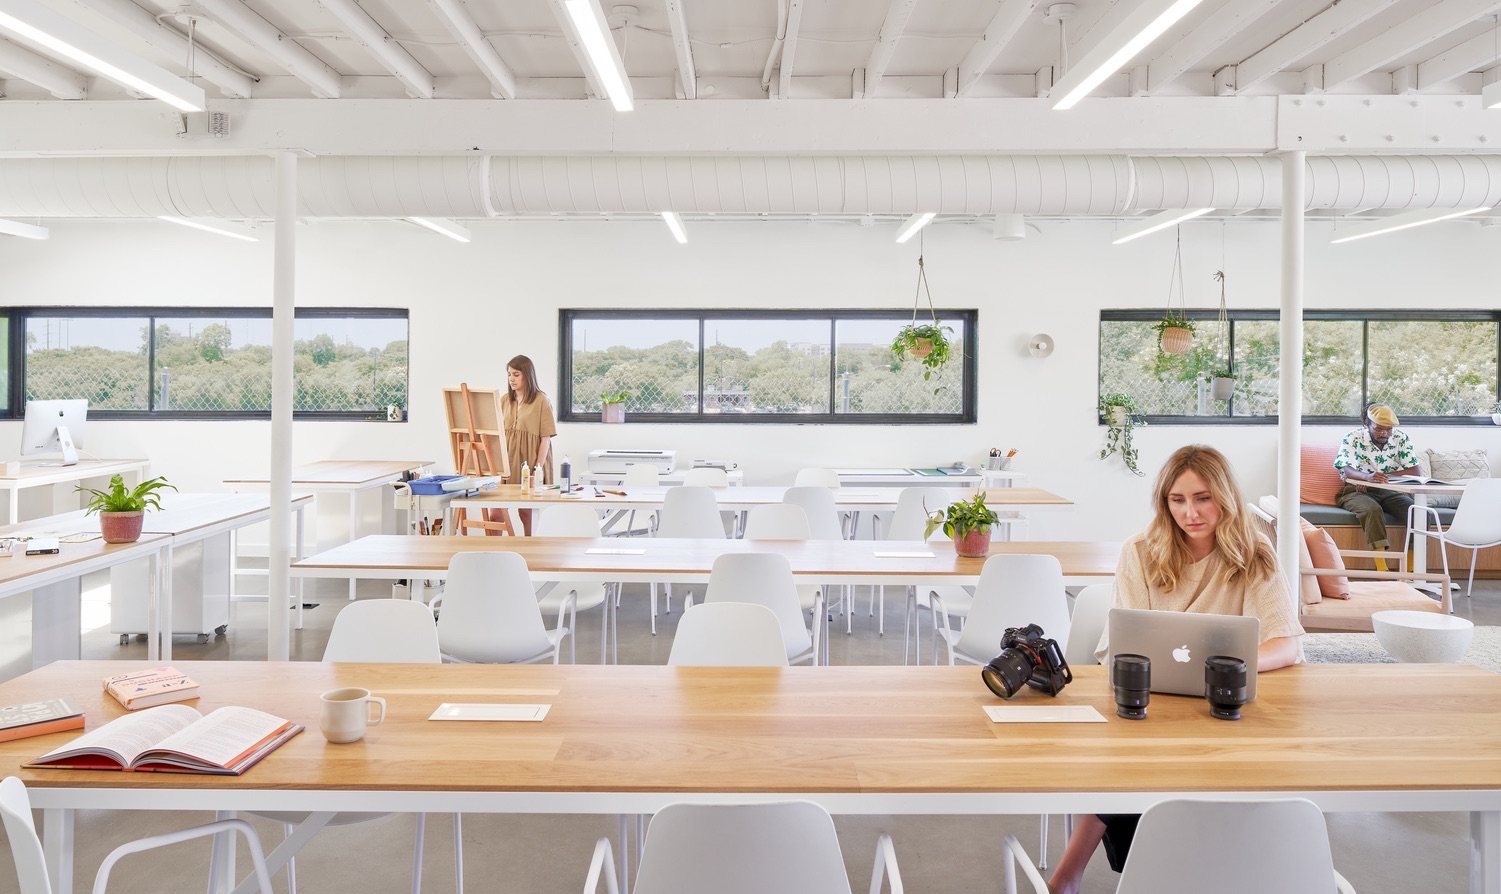 Workers in The Commune coworking studio in Austin, Texas have the right lighting for a variety of tasks, including high CRI lighting for artists